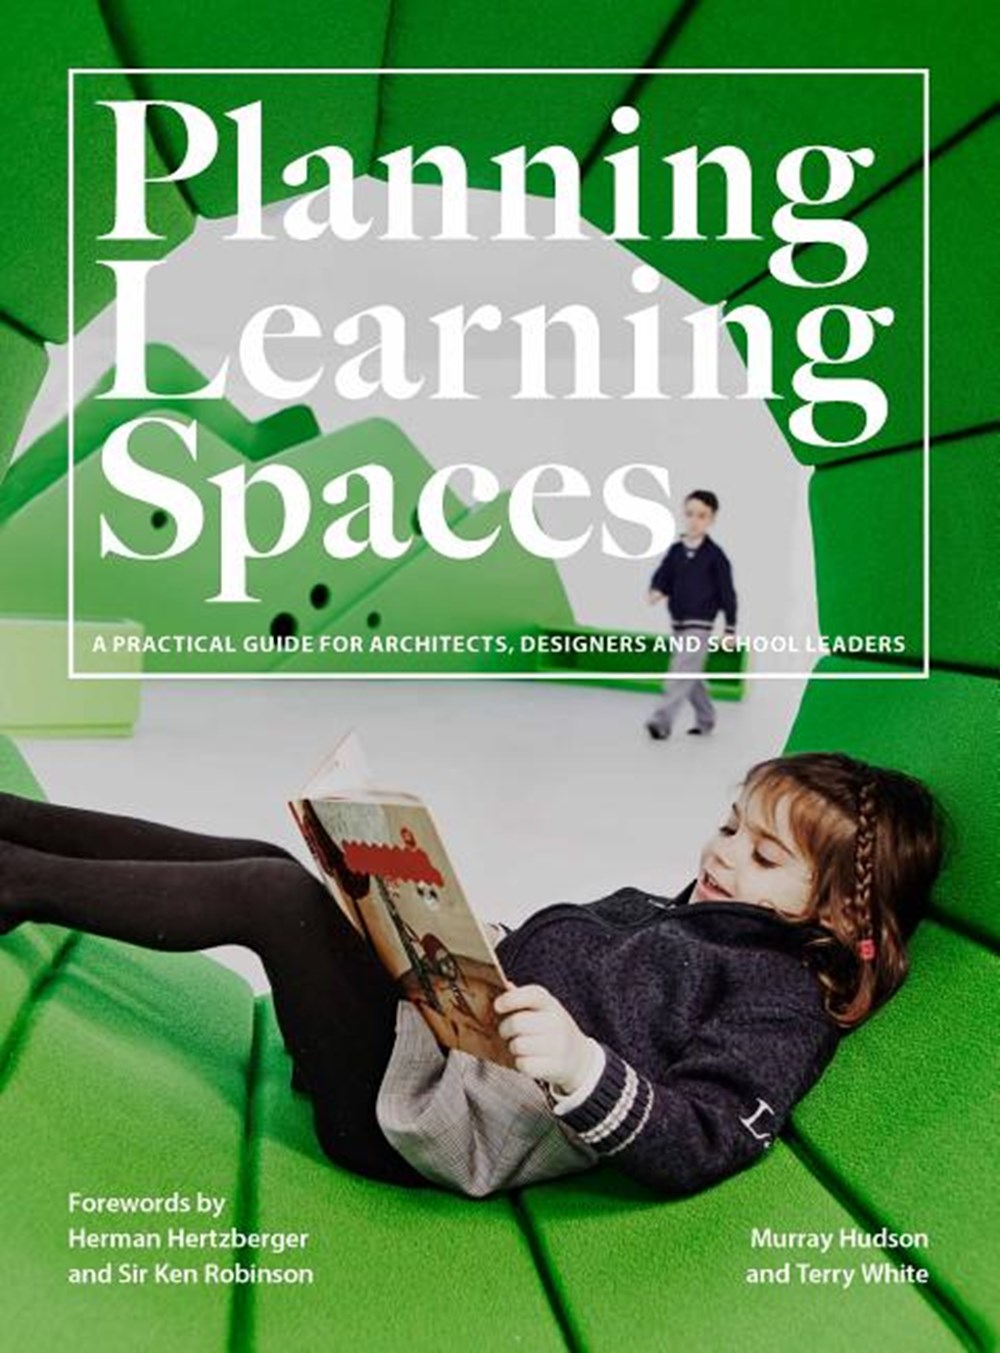 Planning Learning Spaces: A Practical Guide for Architects, Designers and School Leaders (Resources 